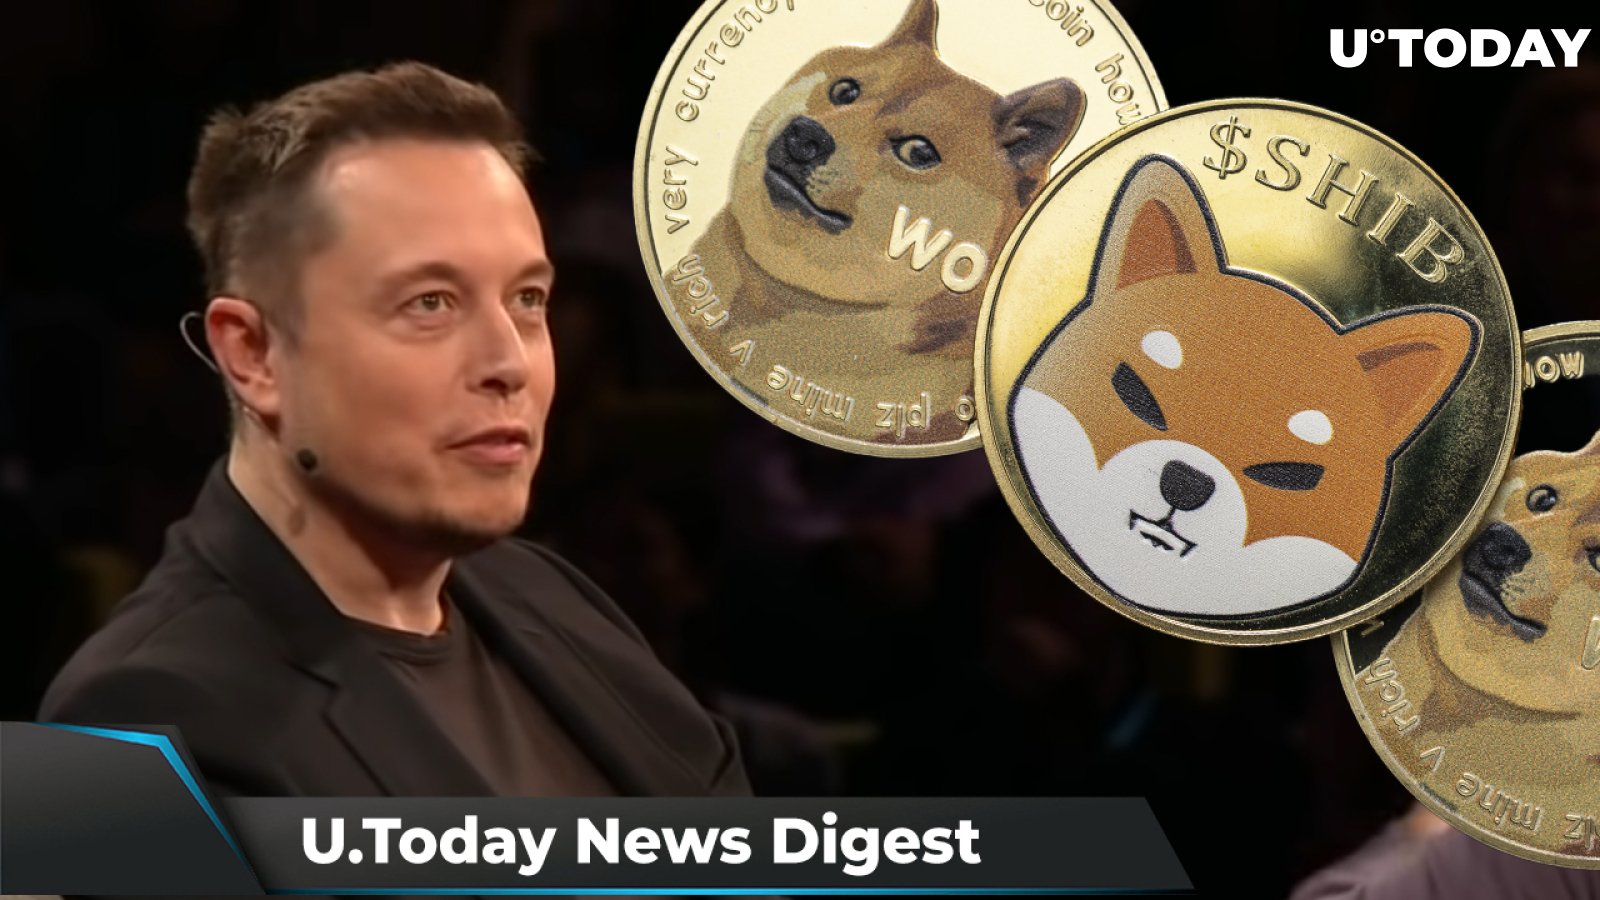 SHIB 2022 Burn Roadmap Released, Elon Musk Says DOGE Is Better Than Anything Else, SundaeSwap Completes Its Audit: Crypto News Digest by U.Today